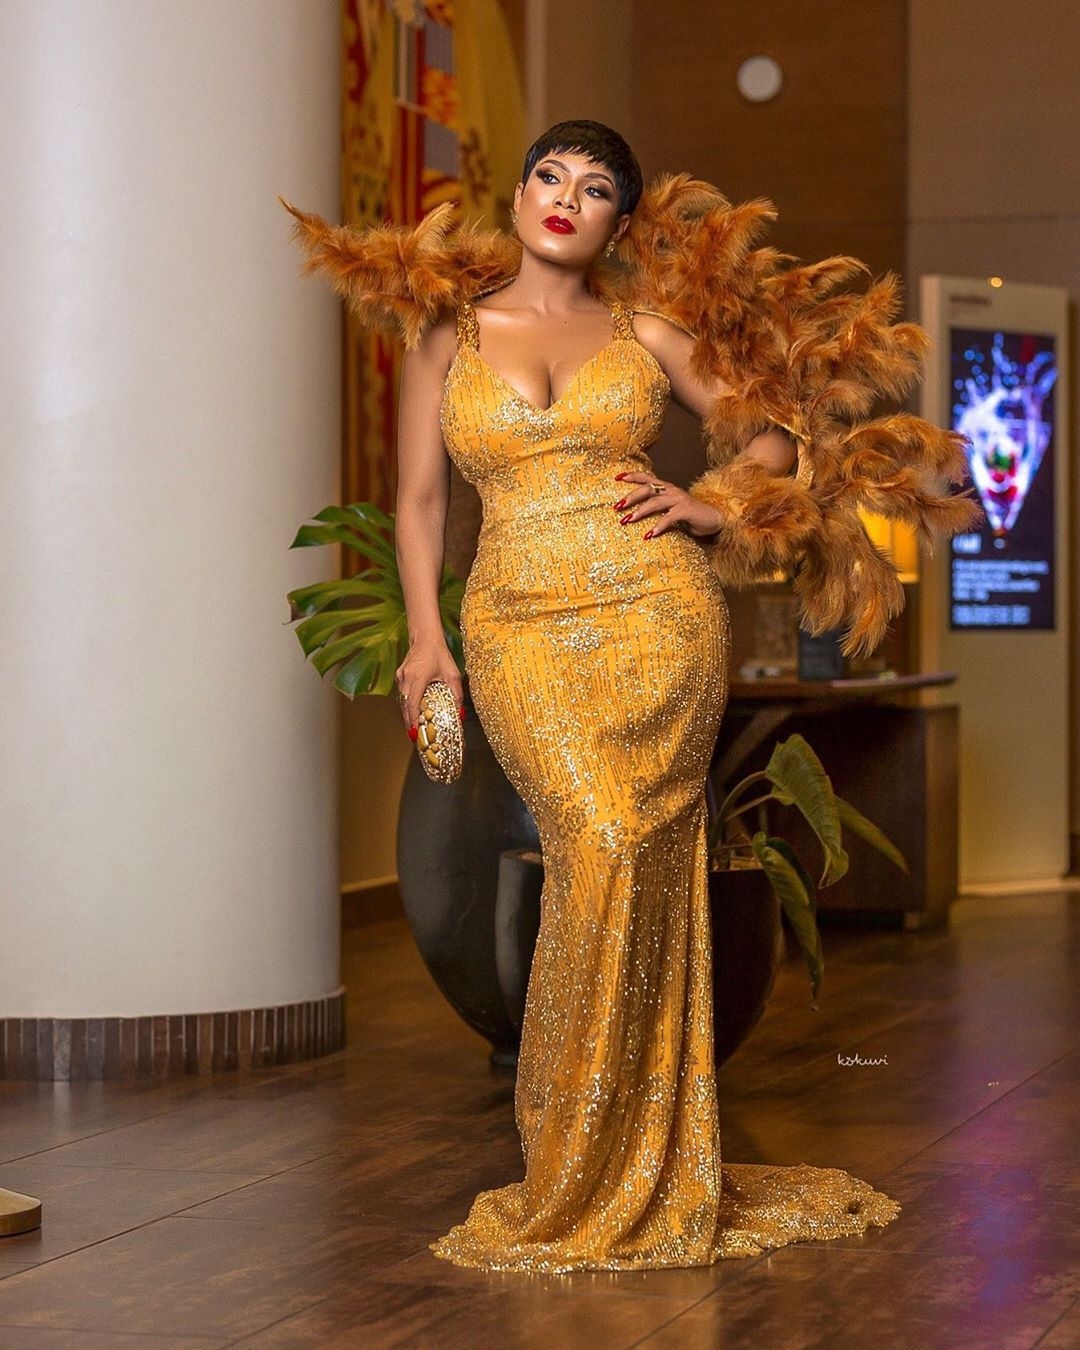 Ghana Is Stepping Up! Here Are The Top 15 Best Dressed Celebrities From The Golden Movie Awards Night